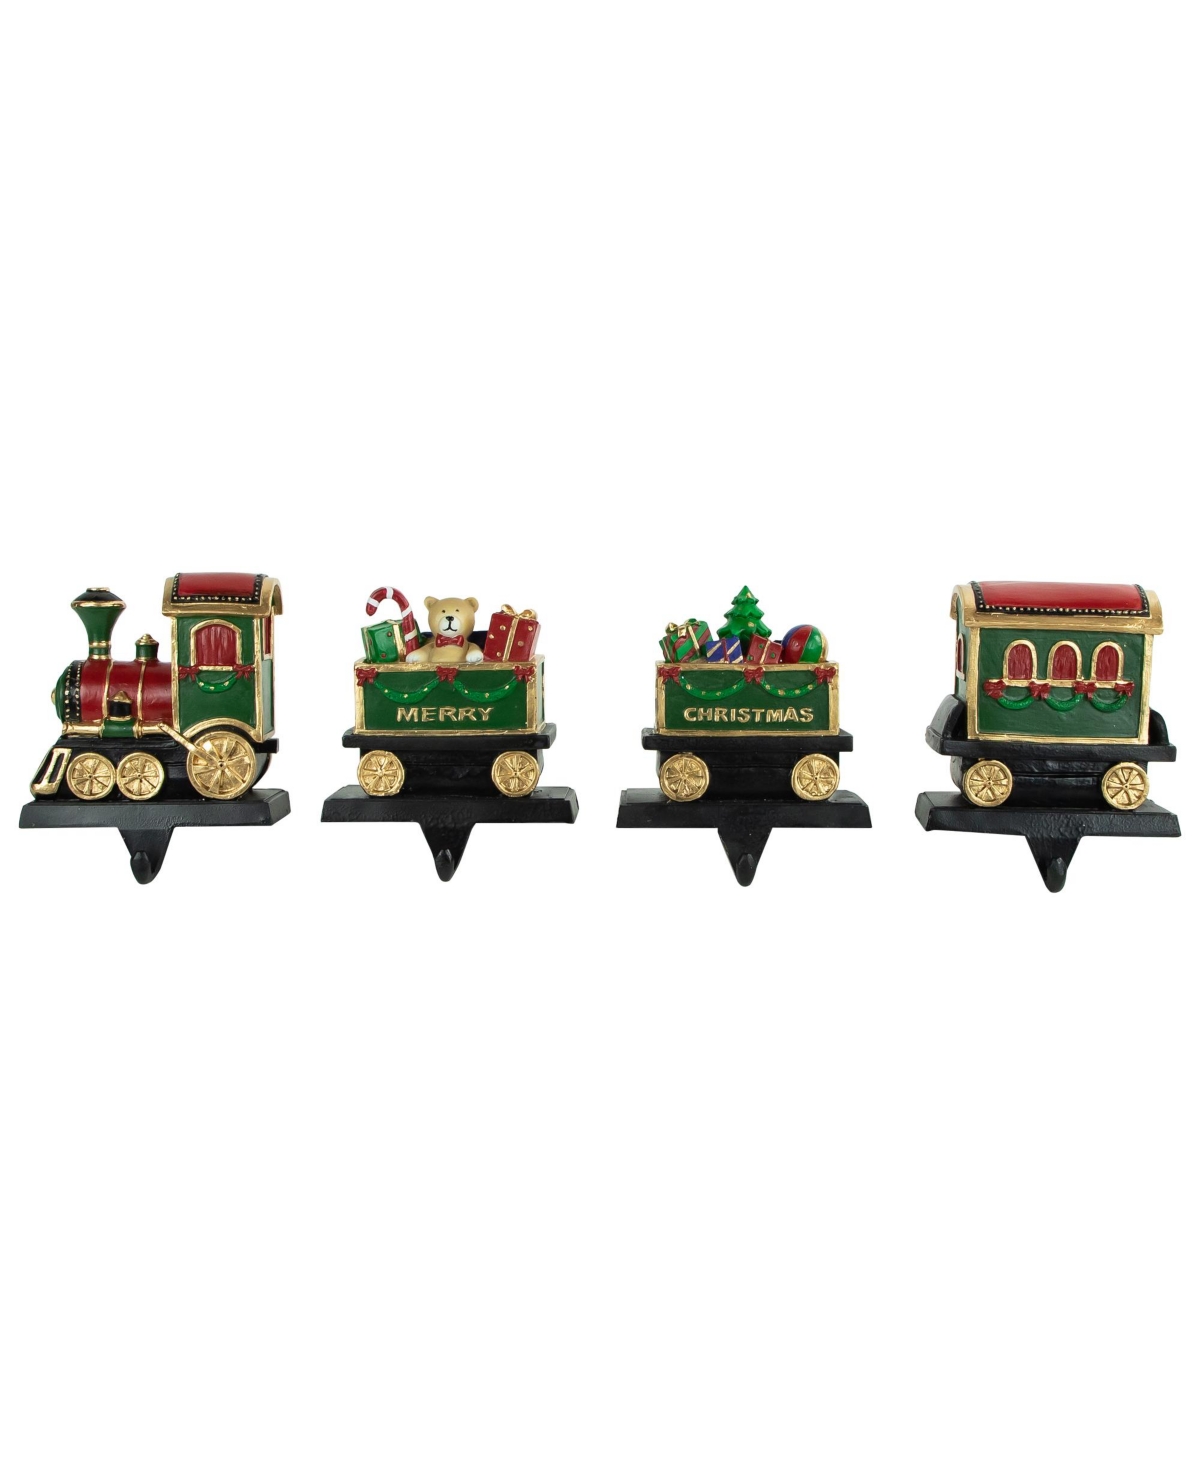 Northlight 4.75" Merry Christmas Train Stocking Holders, Set Of 4 In Red